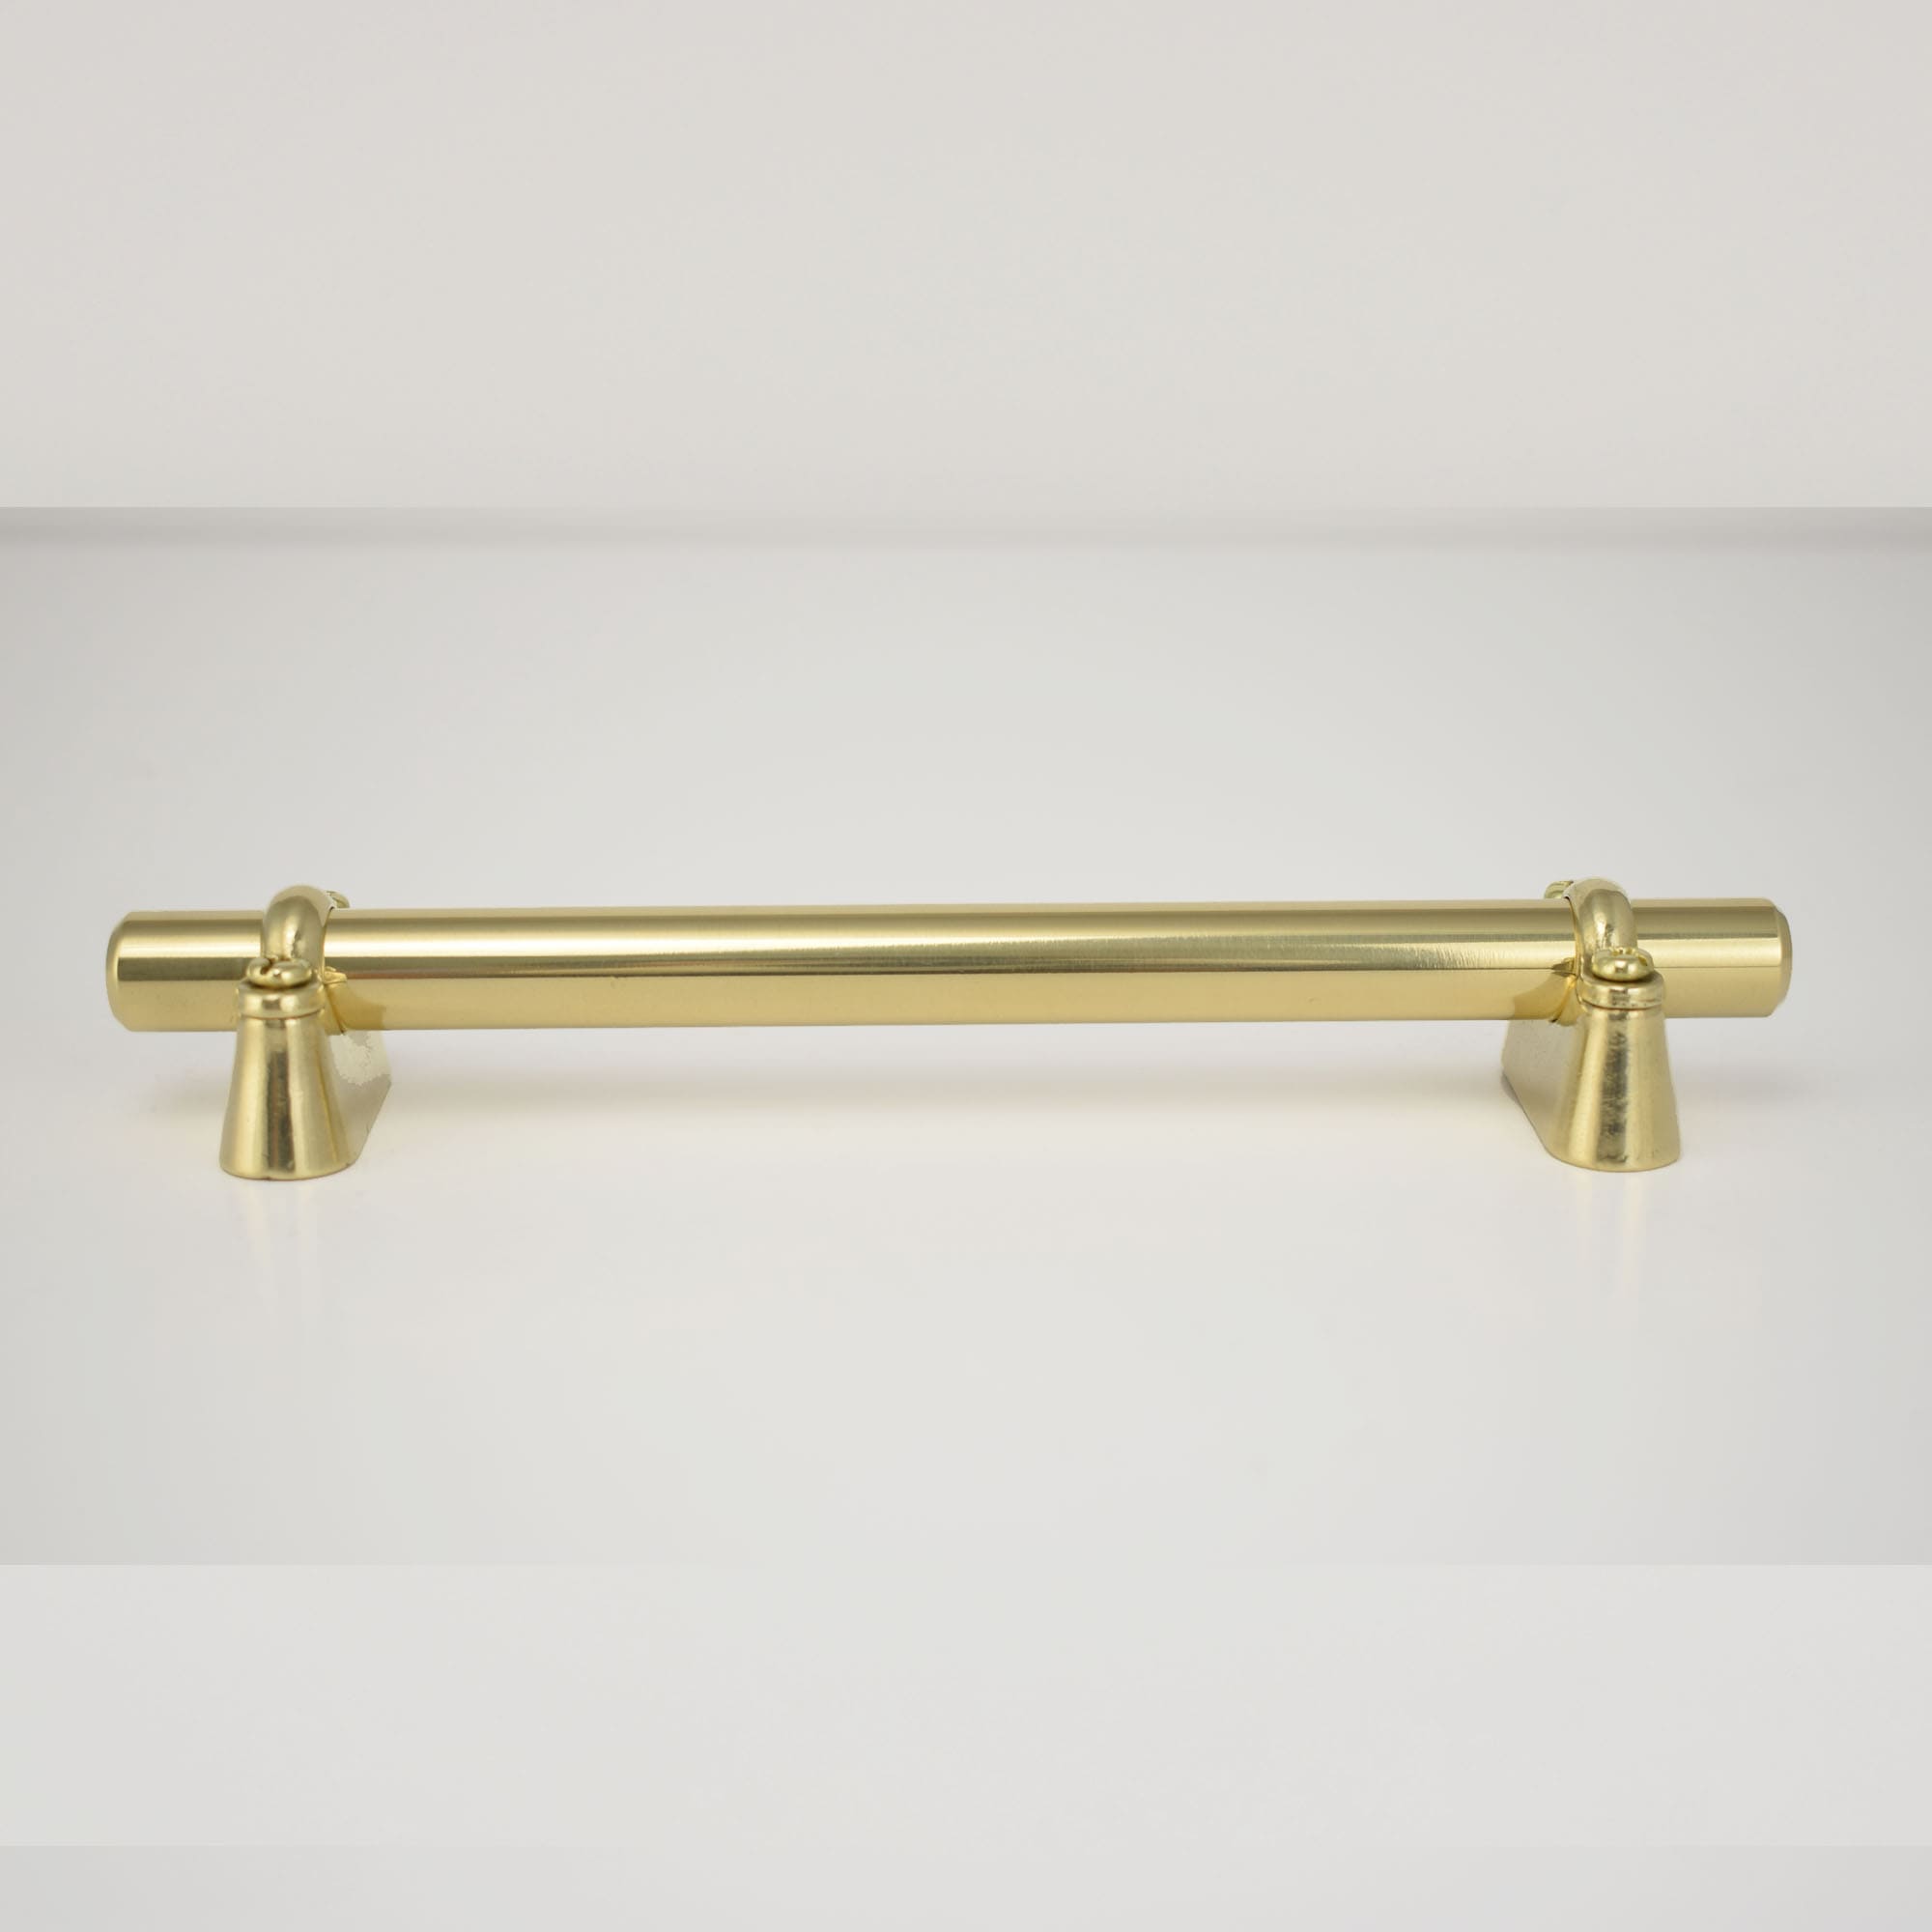 Solid Brass Bar Pull with Solid Brass Extenders on white background